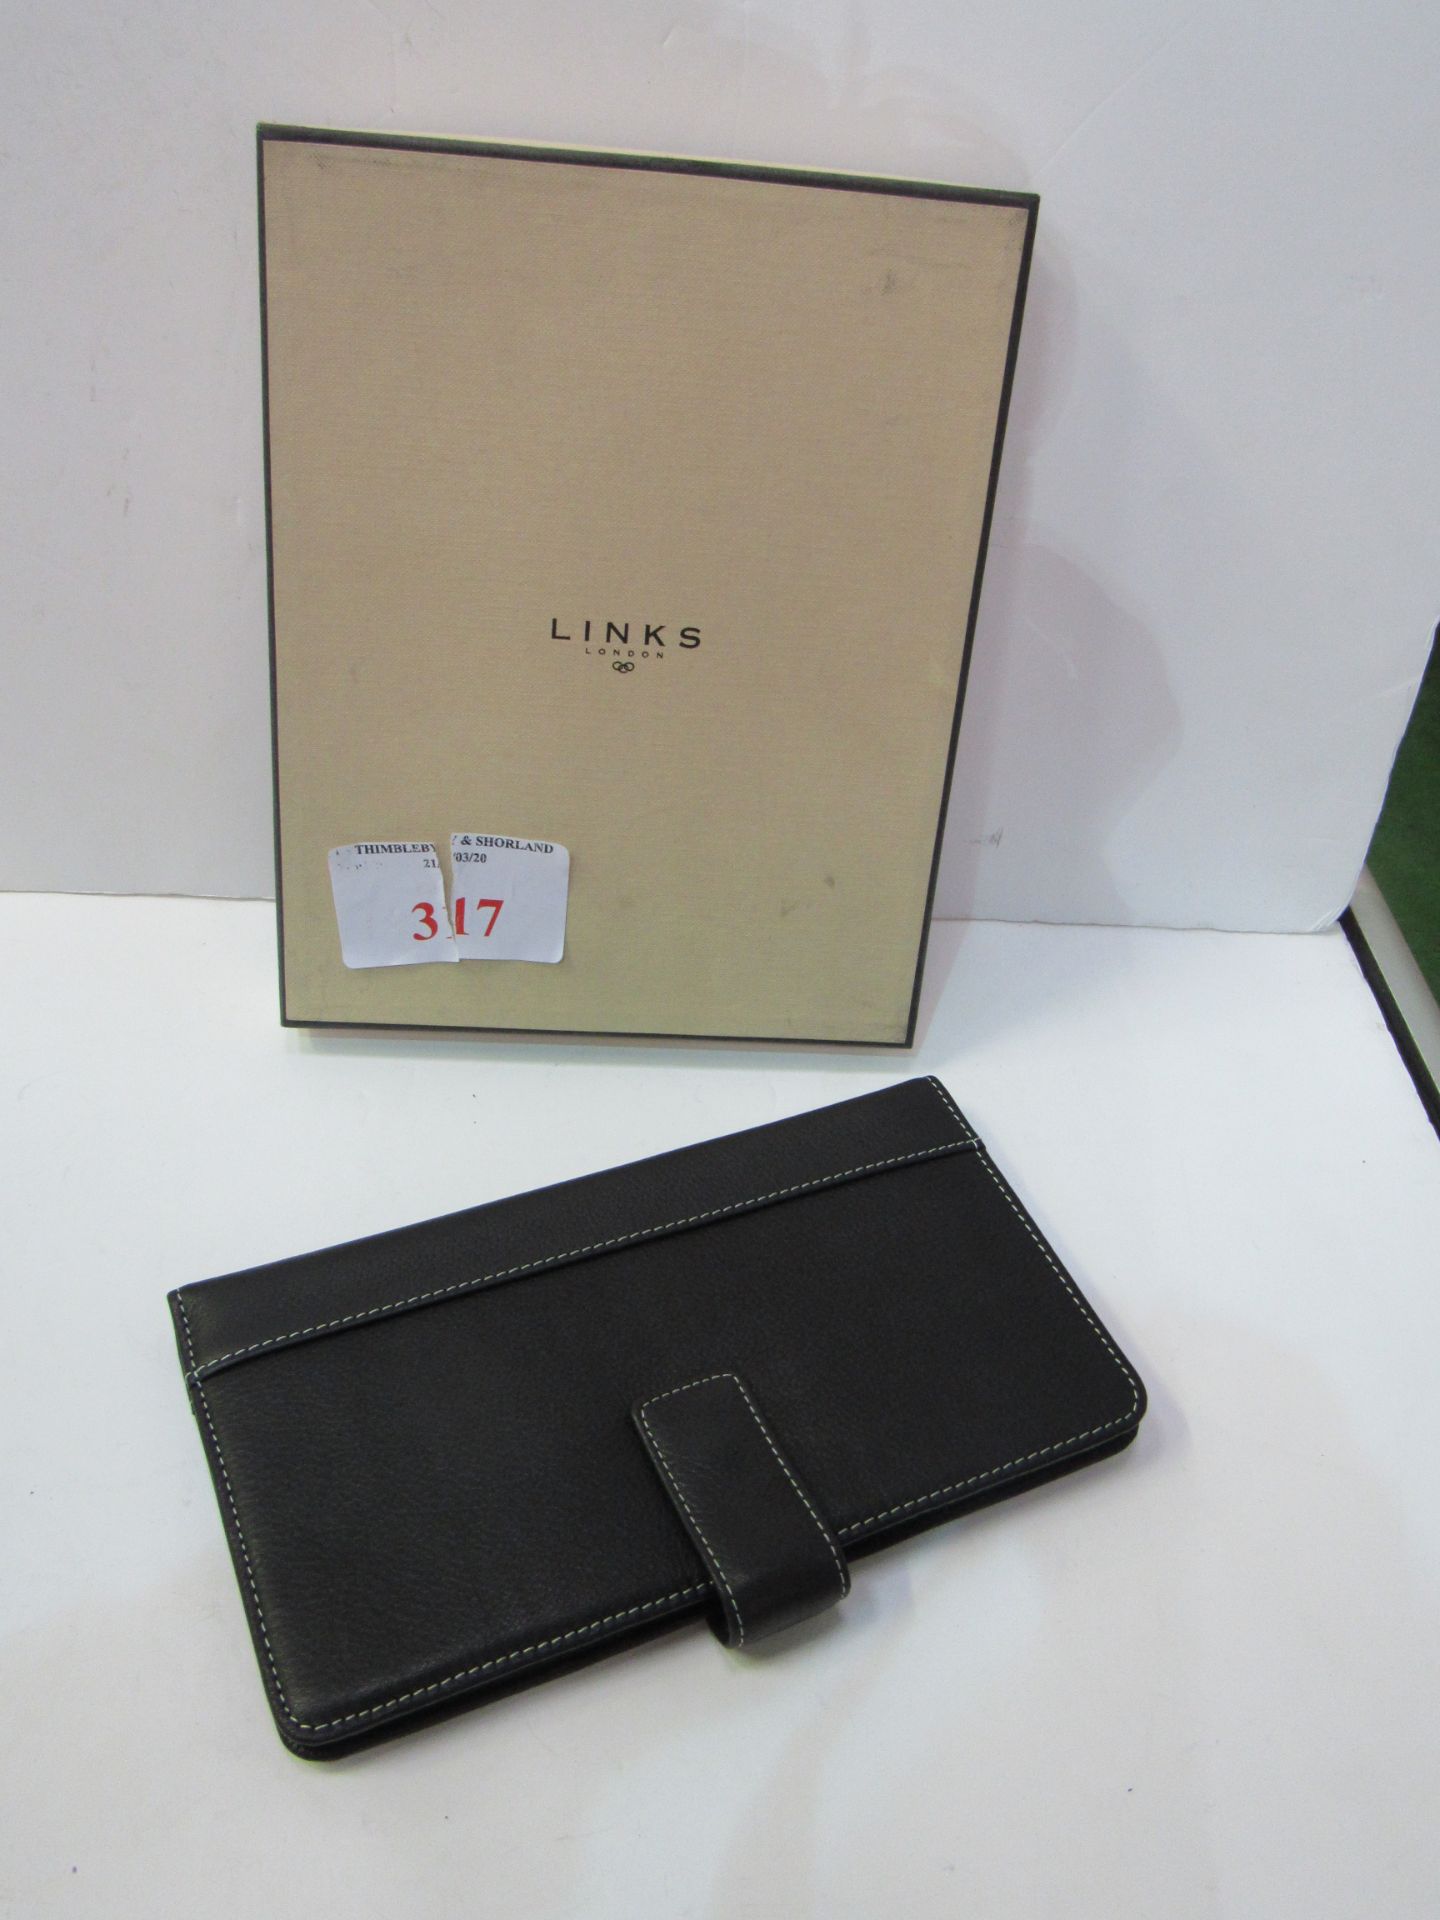 Links of London leather wallet/card holder, dust bag, original box with ribbon. Estimate £30-50.